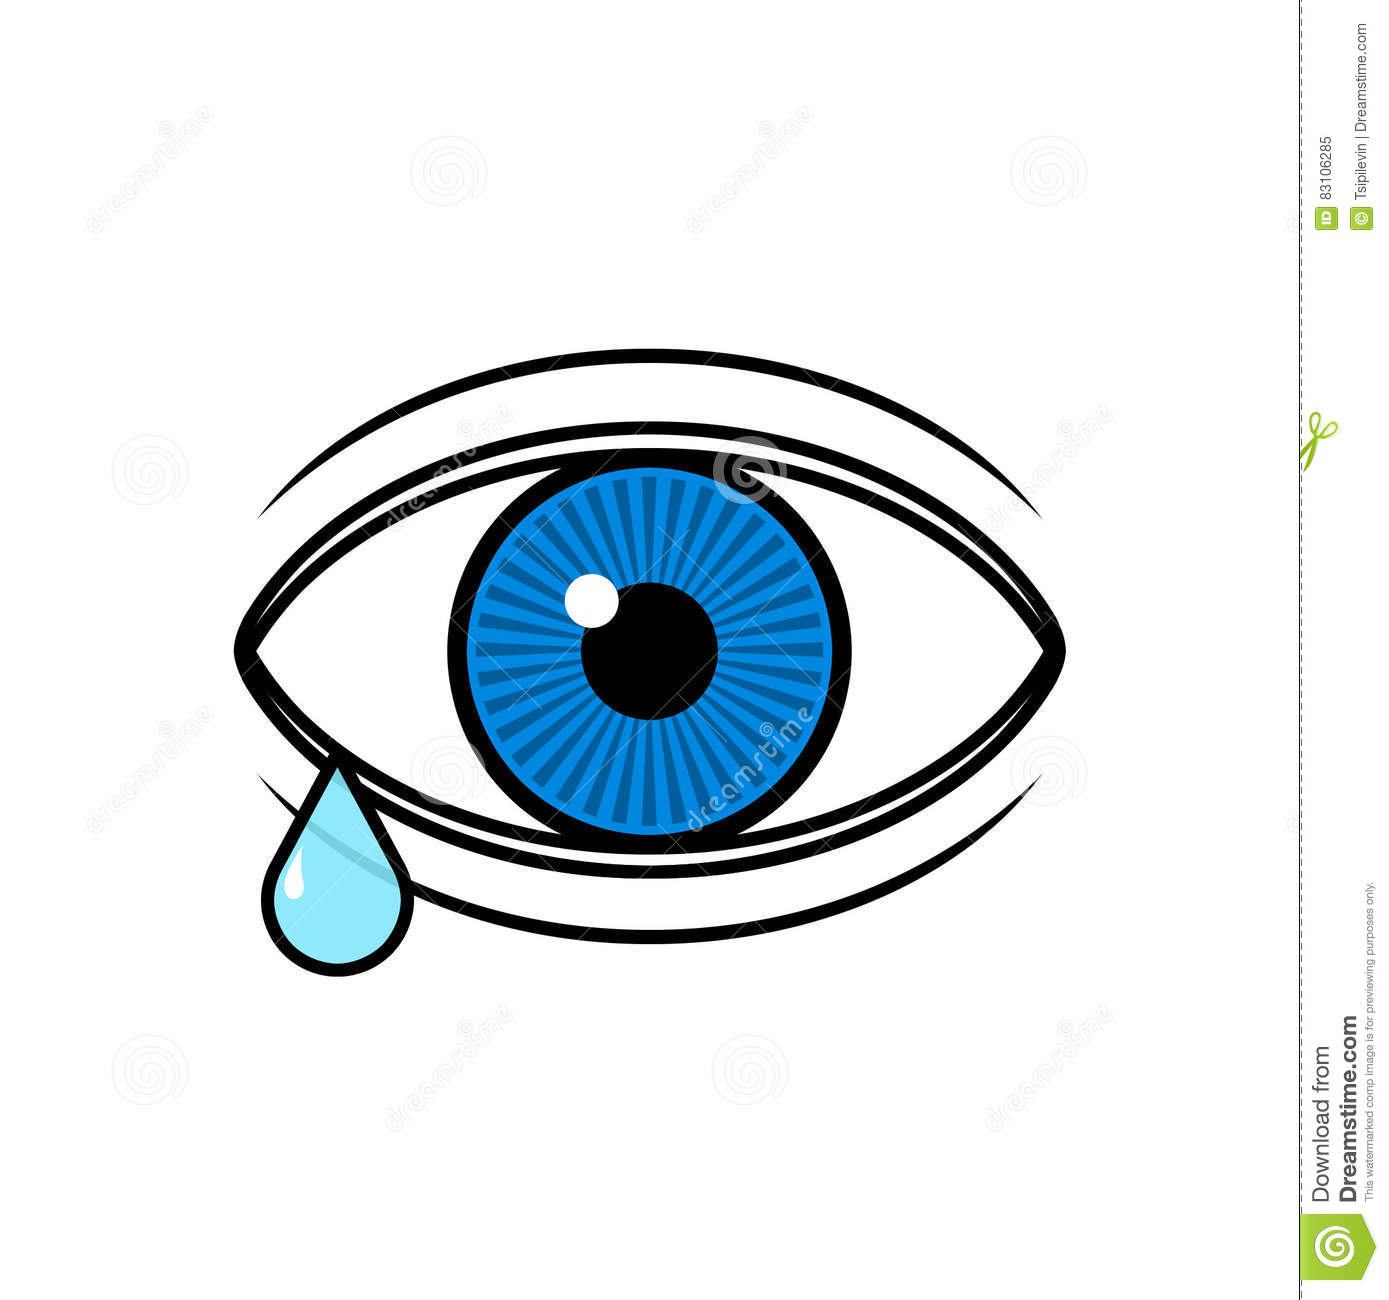 . ClipartLook.com Incredible Design Tear Clipart Eye With A Illustration Stock Of ClipartLook.com 